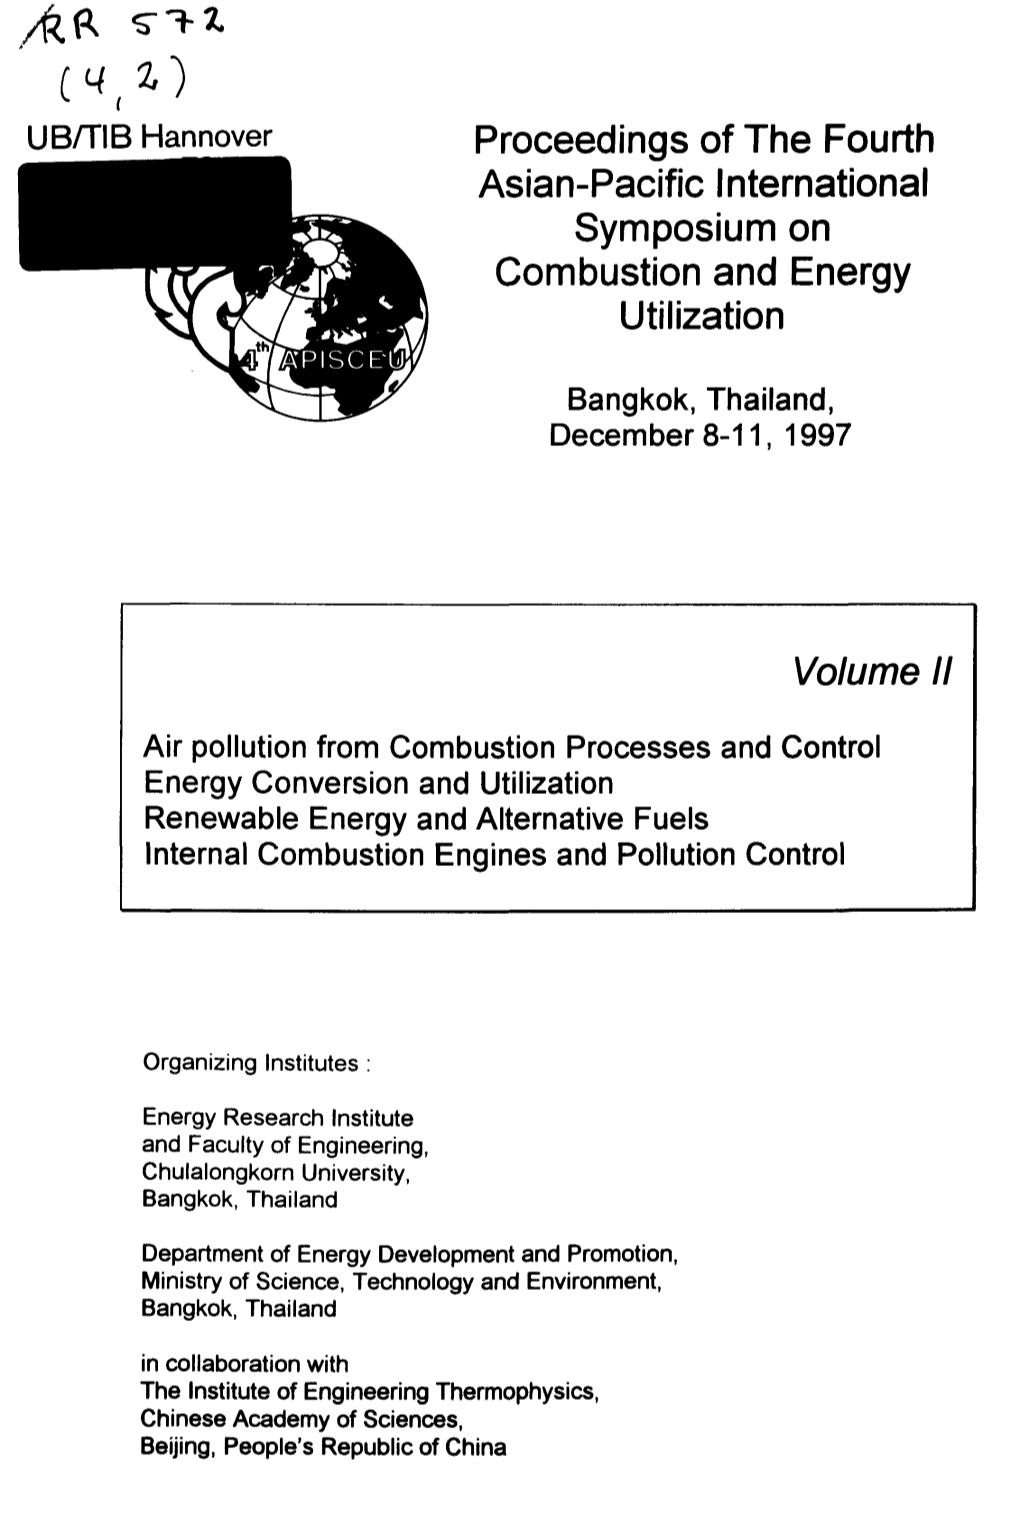 UB/TIB Hannover Proceedings of the Fourth Asian-Pacific International Symposium on Combustion and Energy Utilization